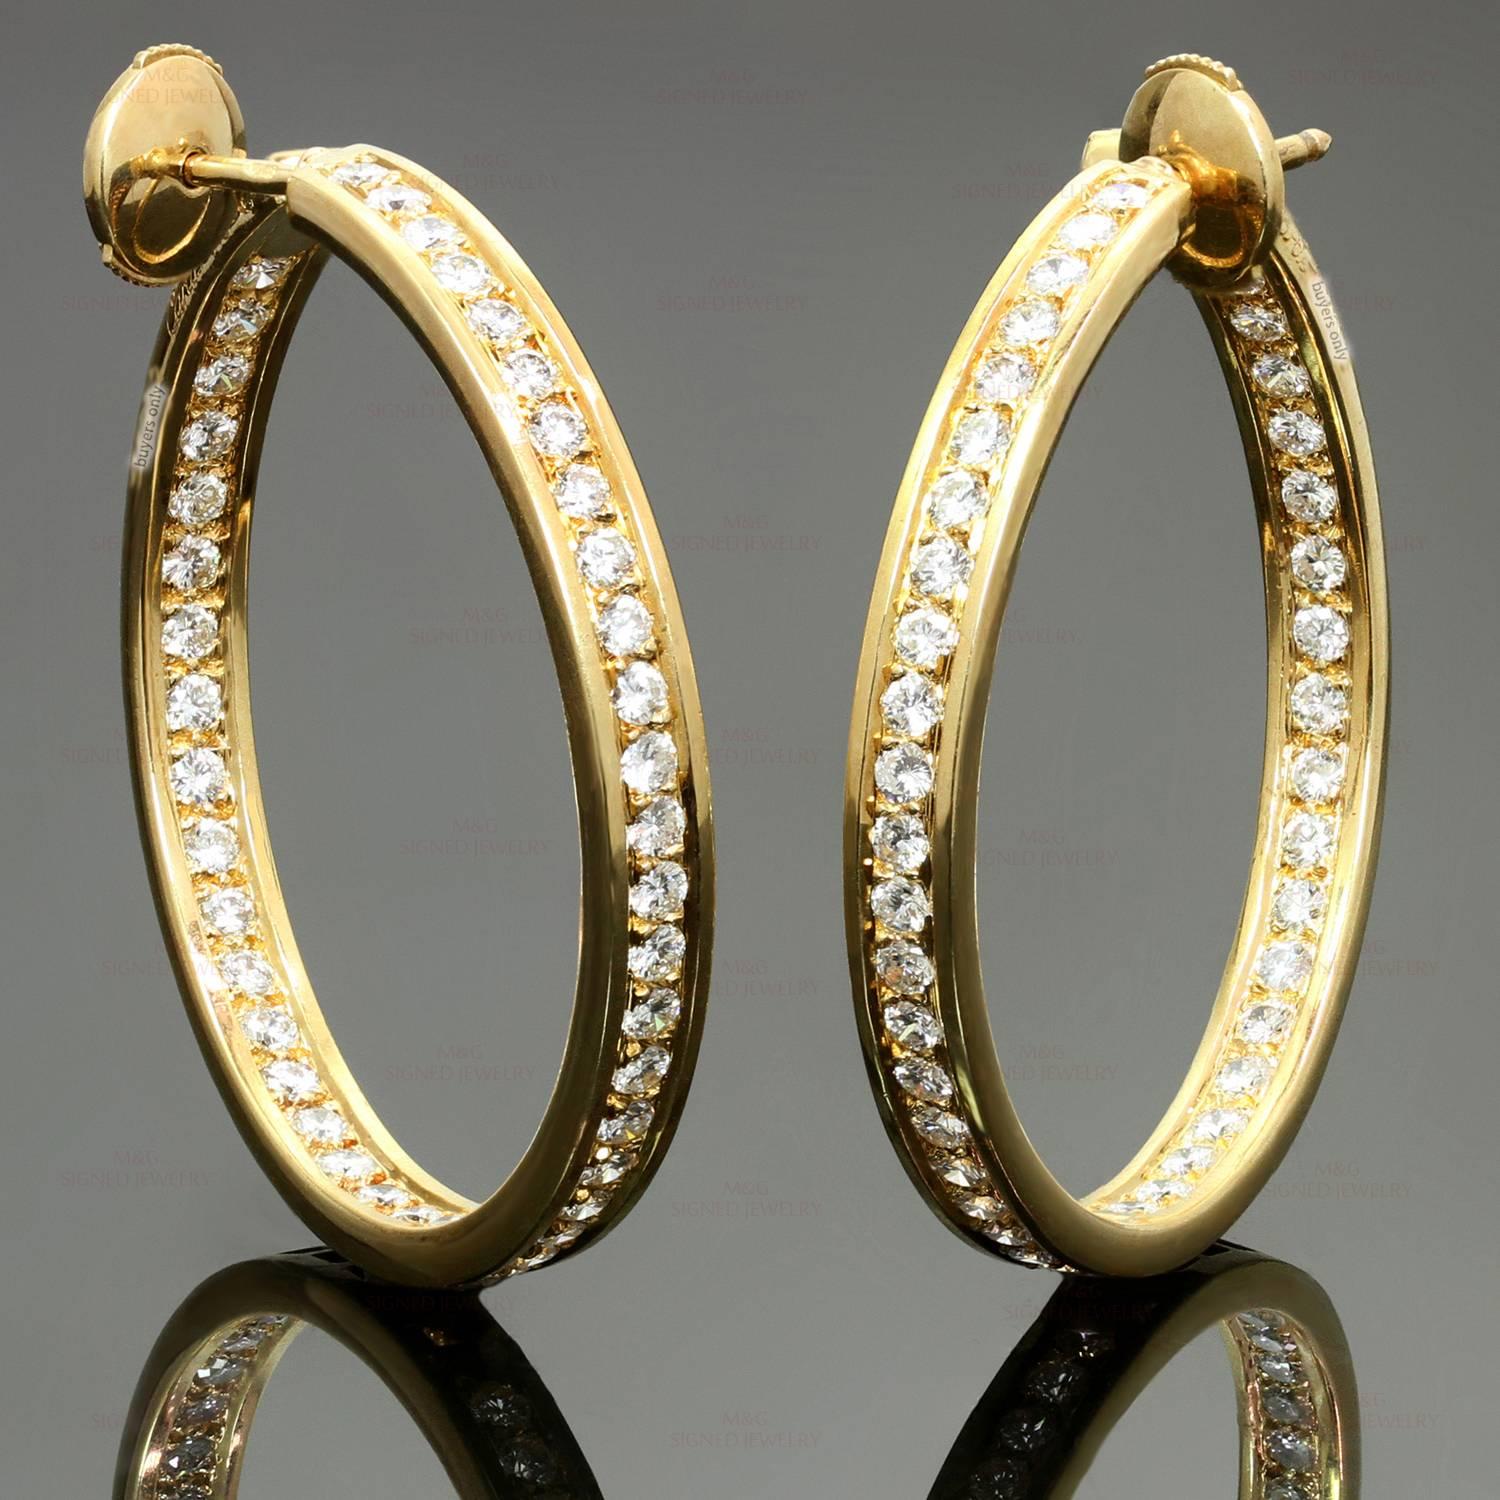 These magnificent Cartier hoop earrings featuring the unique inside out design are crafted in 18k yellow gold and set with brilliant-cut round diamonds of an estimated 2.94 carats. Made in France circa 1990s. Measurements: 0.15" (4mm) width,